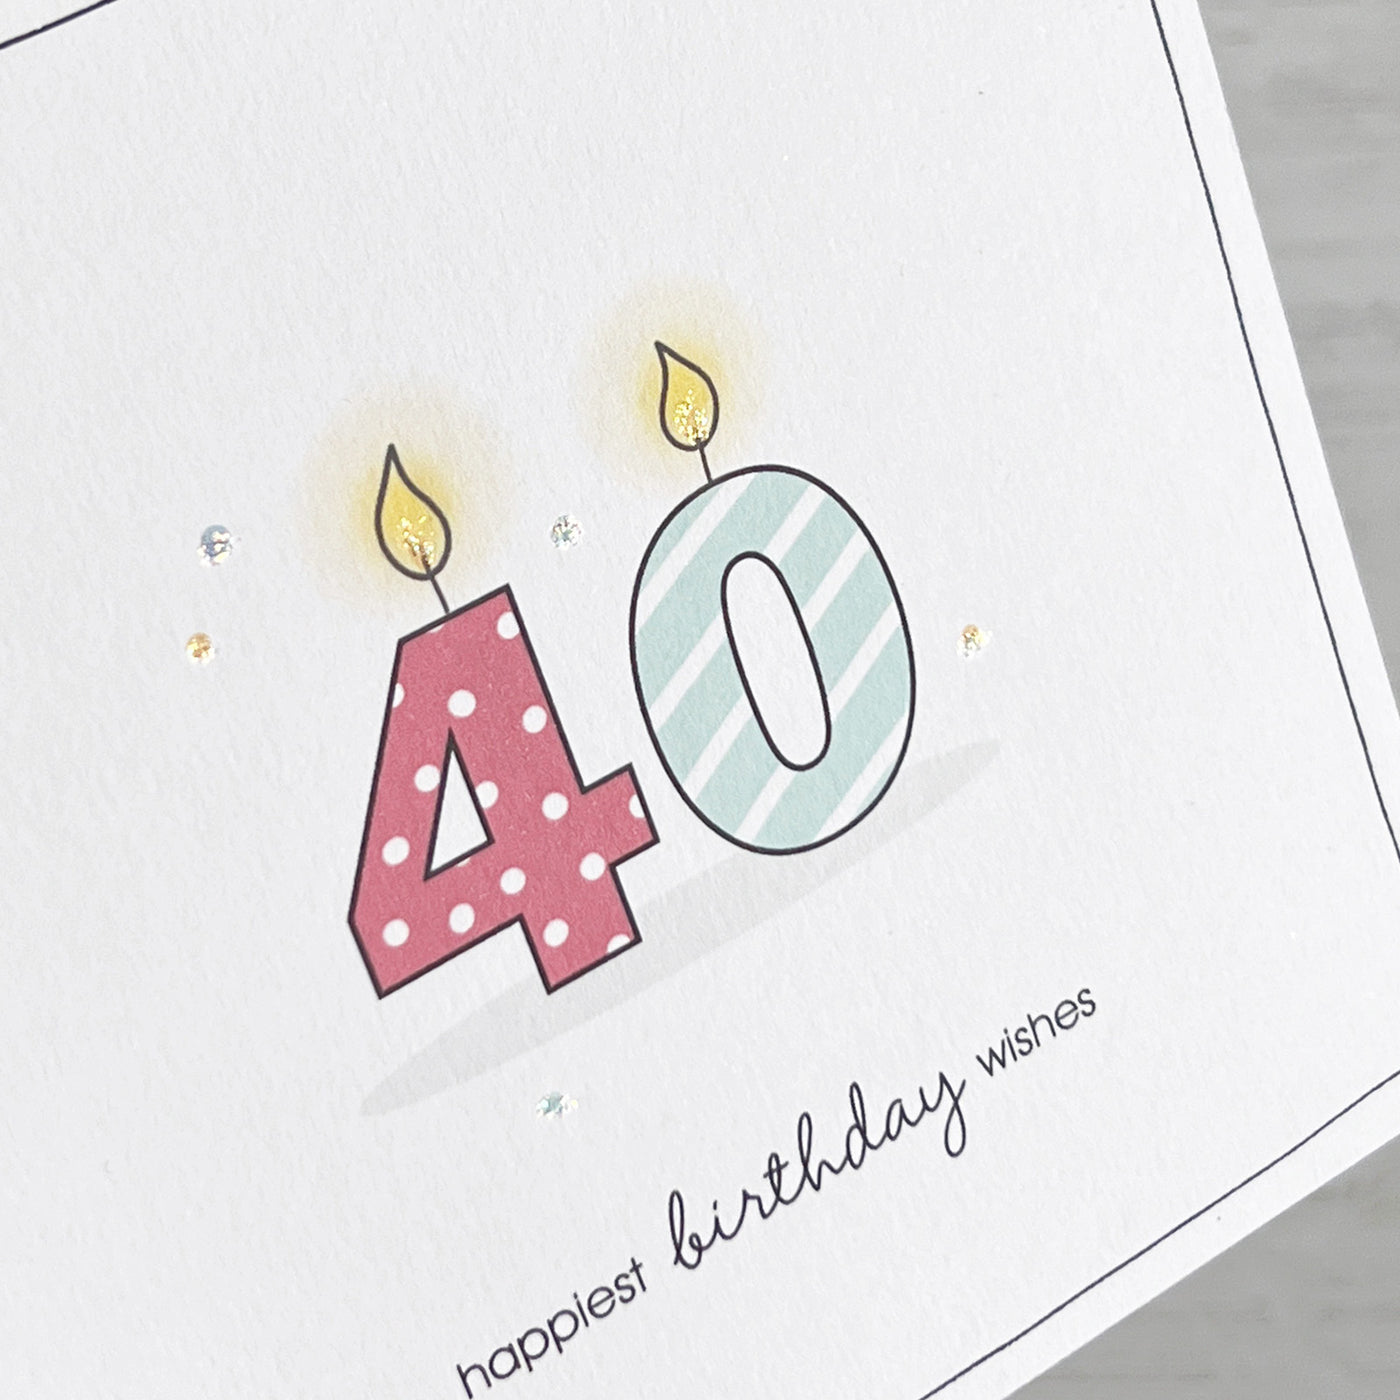 Birthday Candle Age Card